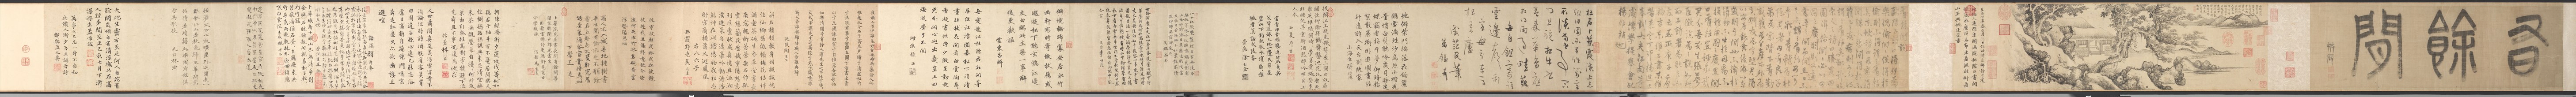 Leisure Enough to Spare, 1360. Yao Tingmei (Chinese, active mid-1300s). Handscroll, ink on paper;